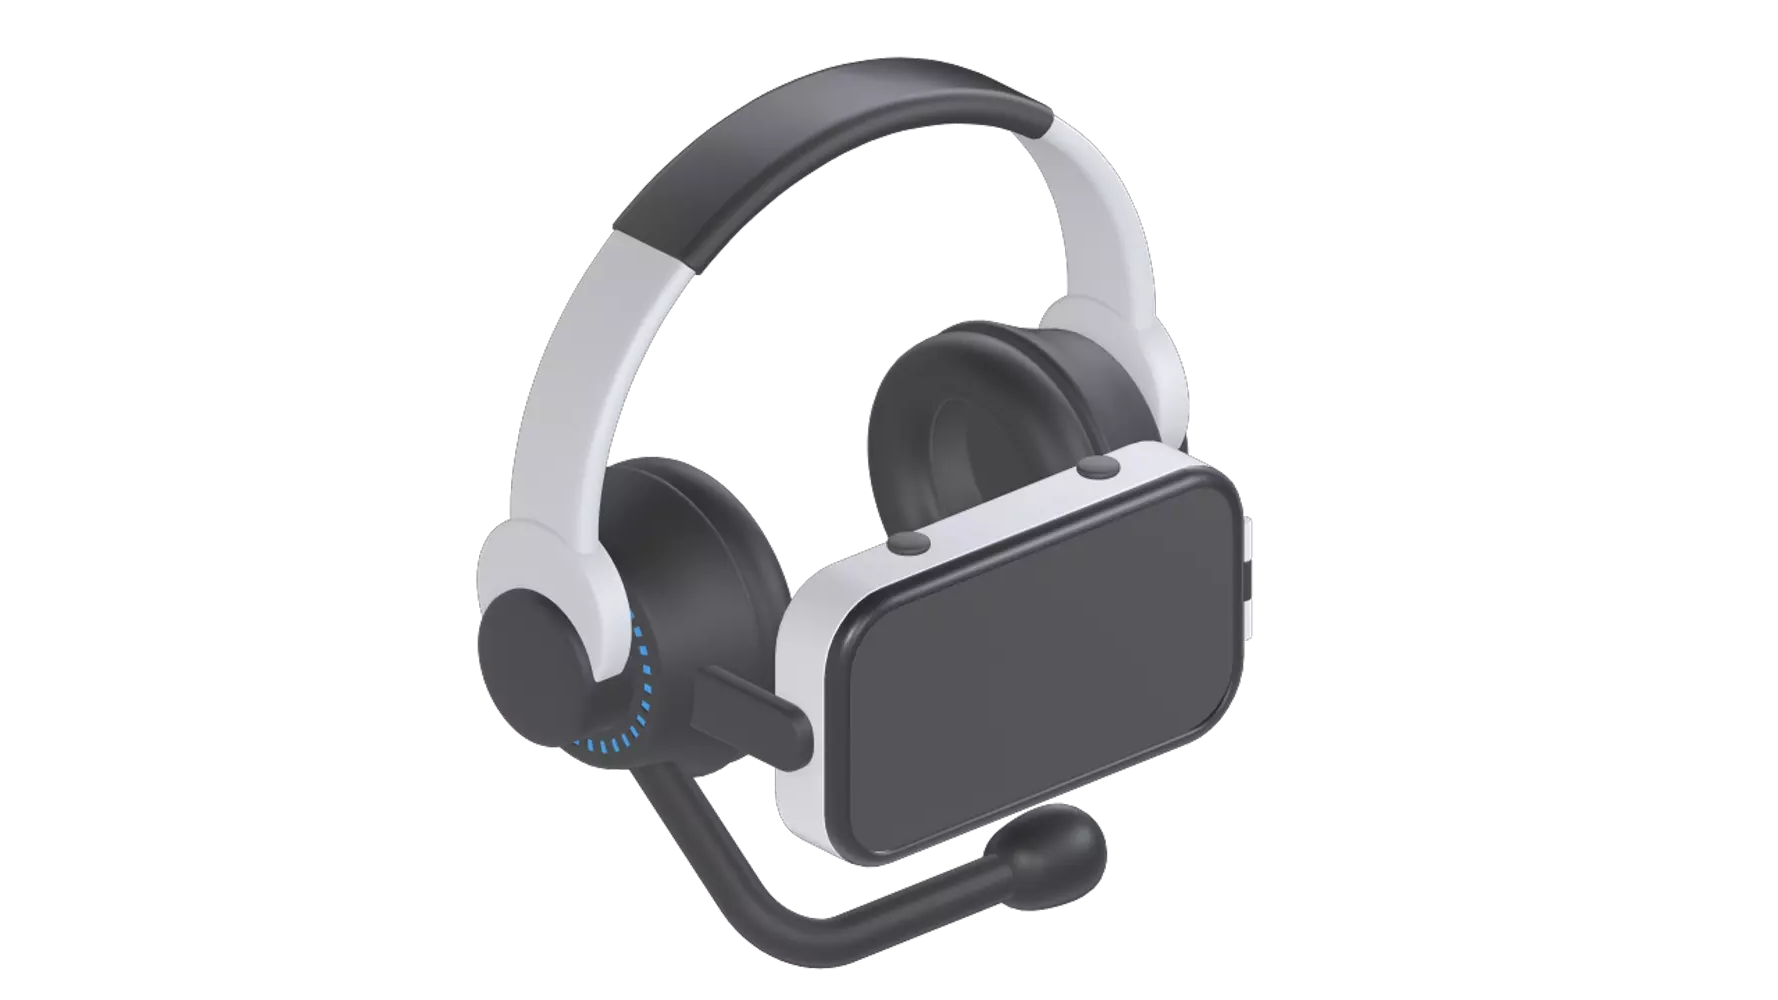 Headphone With VR 3D Graphic